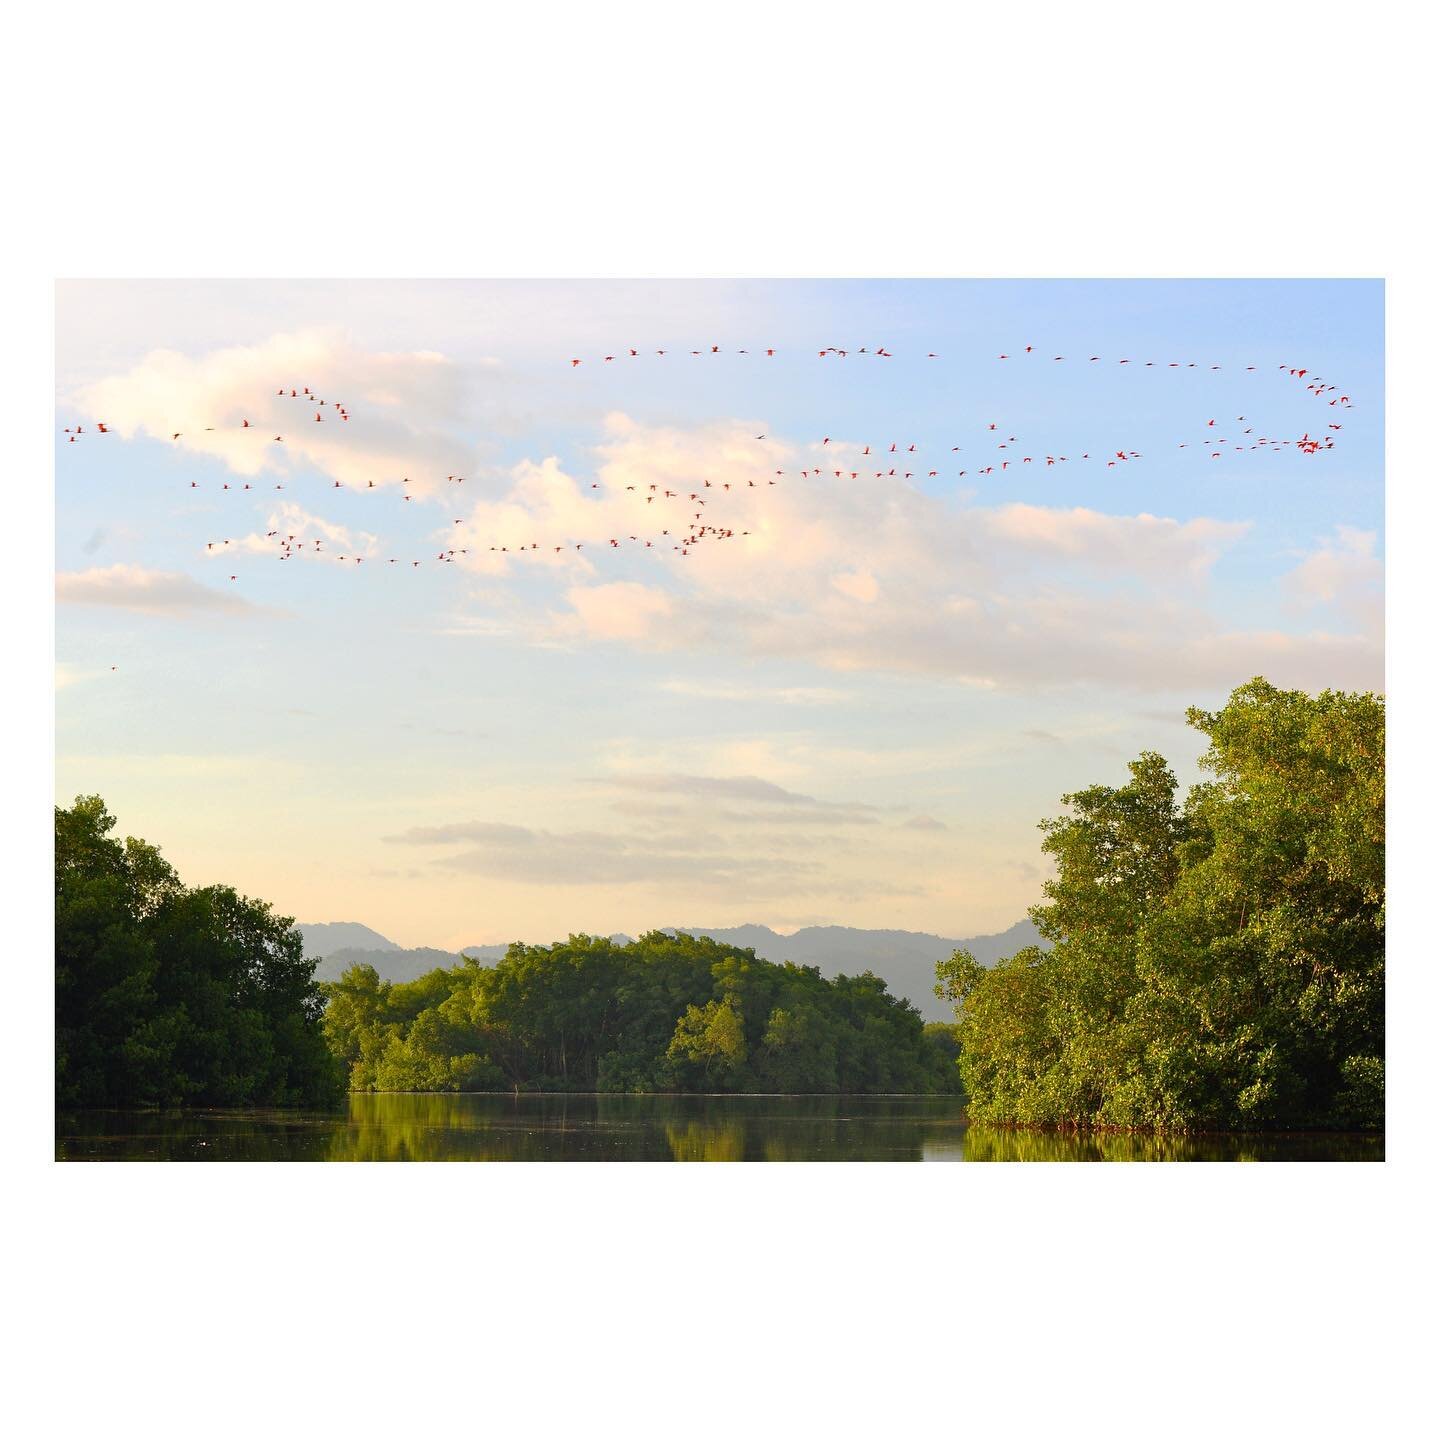 Flock of pink flamingos flying over the Caroni River in Trinidad from a scout trip years back. #trinidad #locationscouting #pinkflamingo #eatyourheartoutjohnwaters